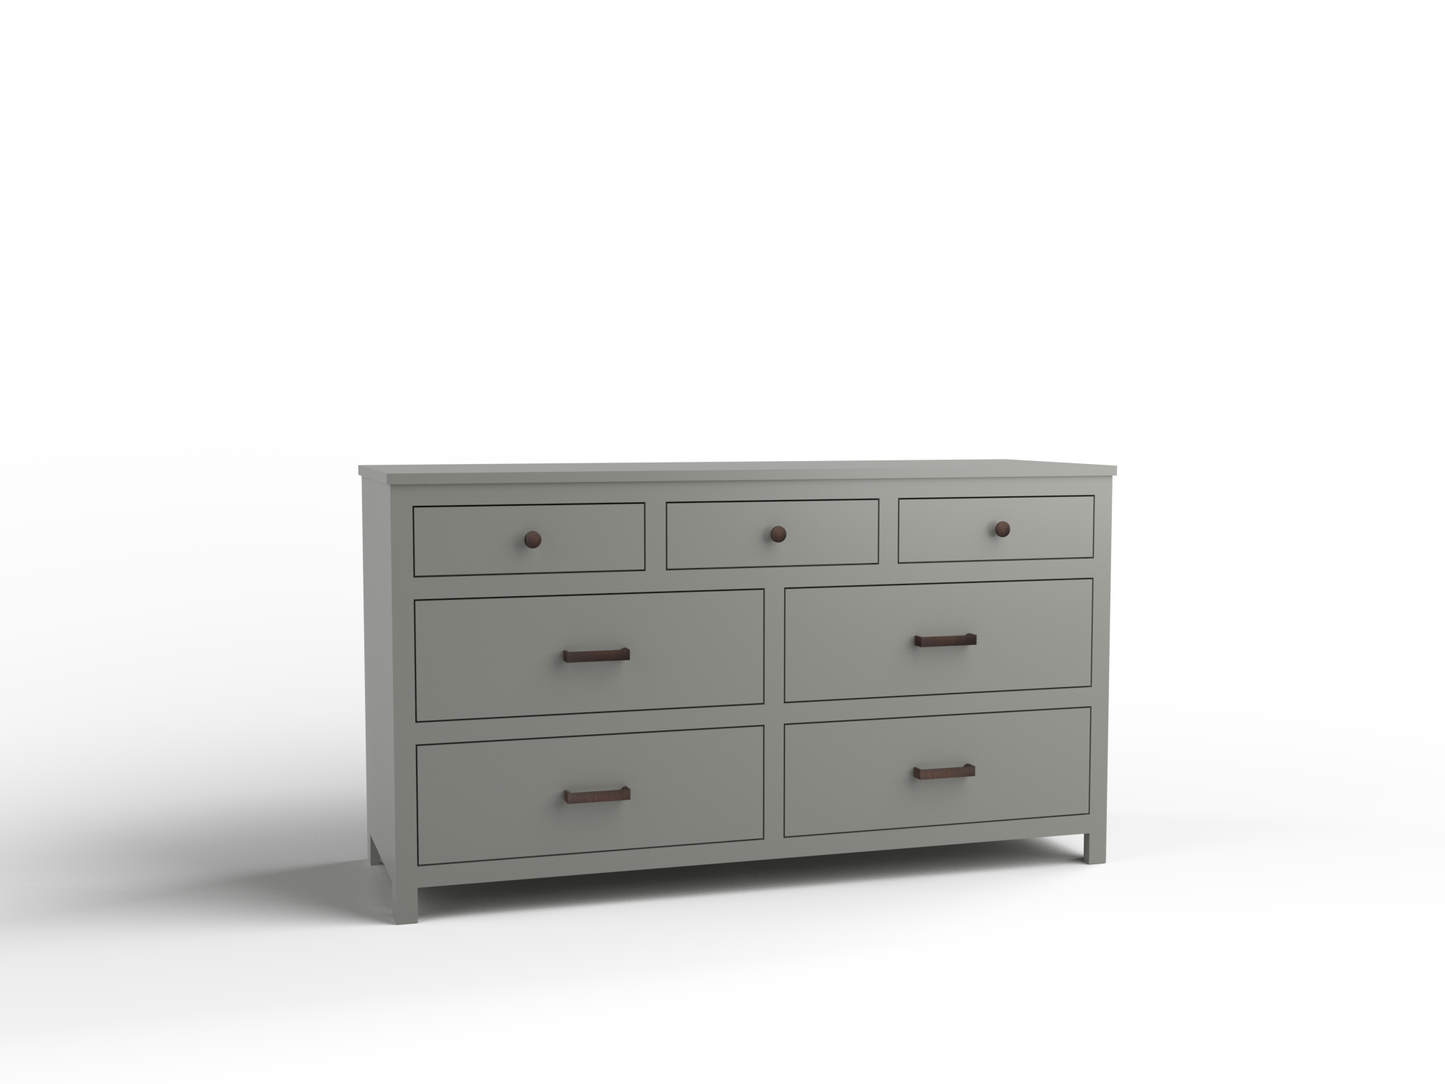 Acadia Tremont Seven Drawer Dresser features three small drawers as well as four large drawers below. Pictured in Carolina Gull finish.